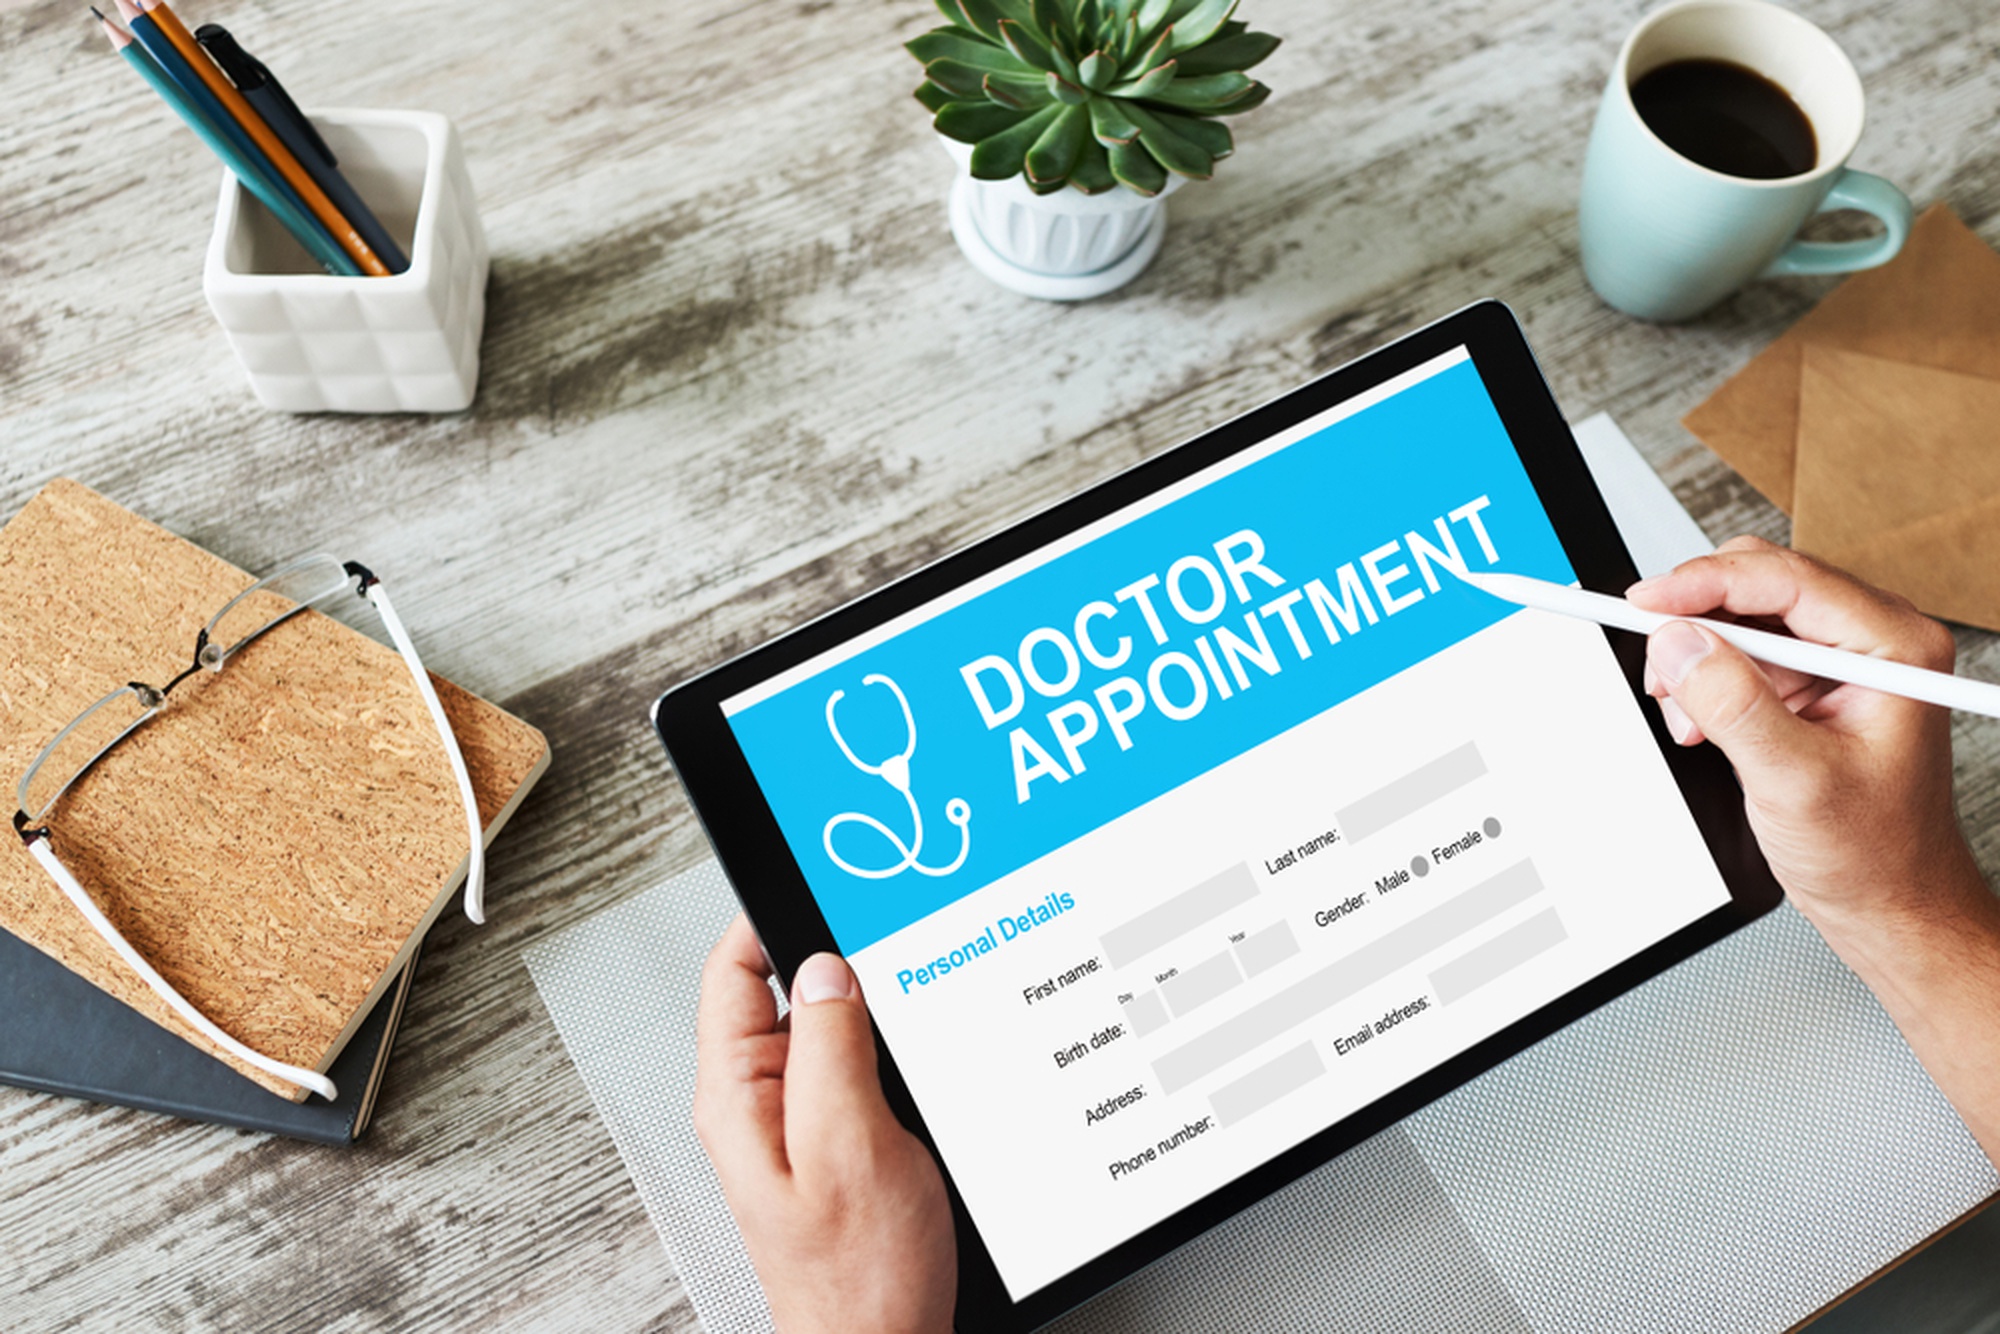 Doctor Appointment Application Development: Benefits, Features & Cost